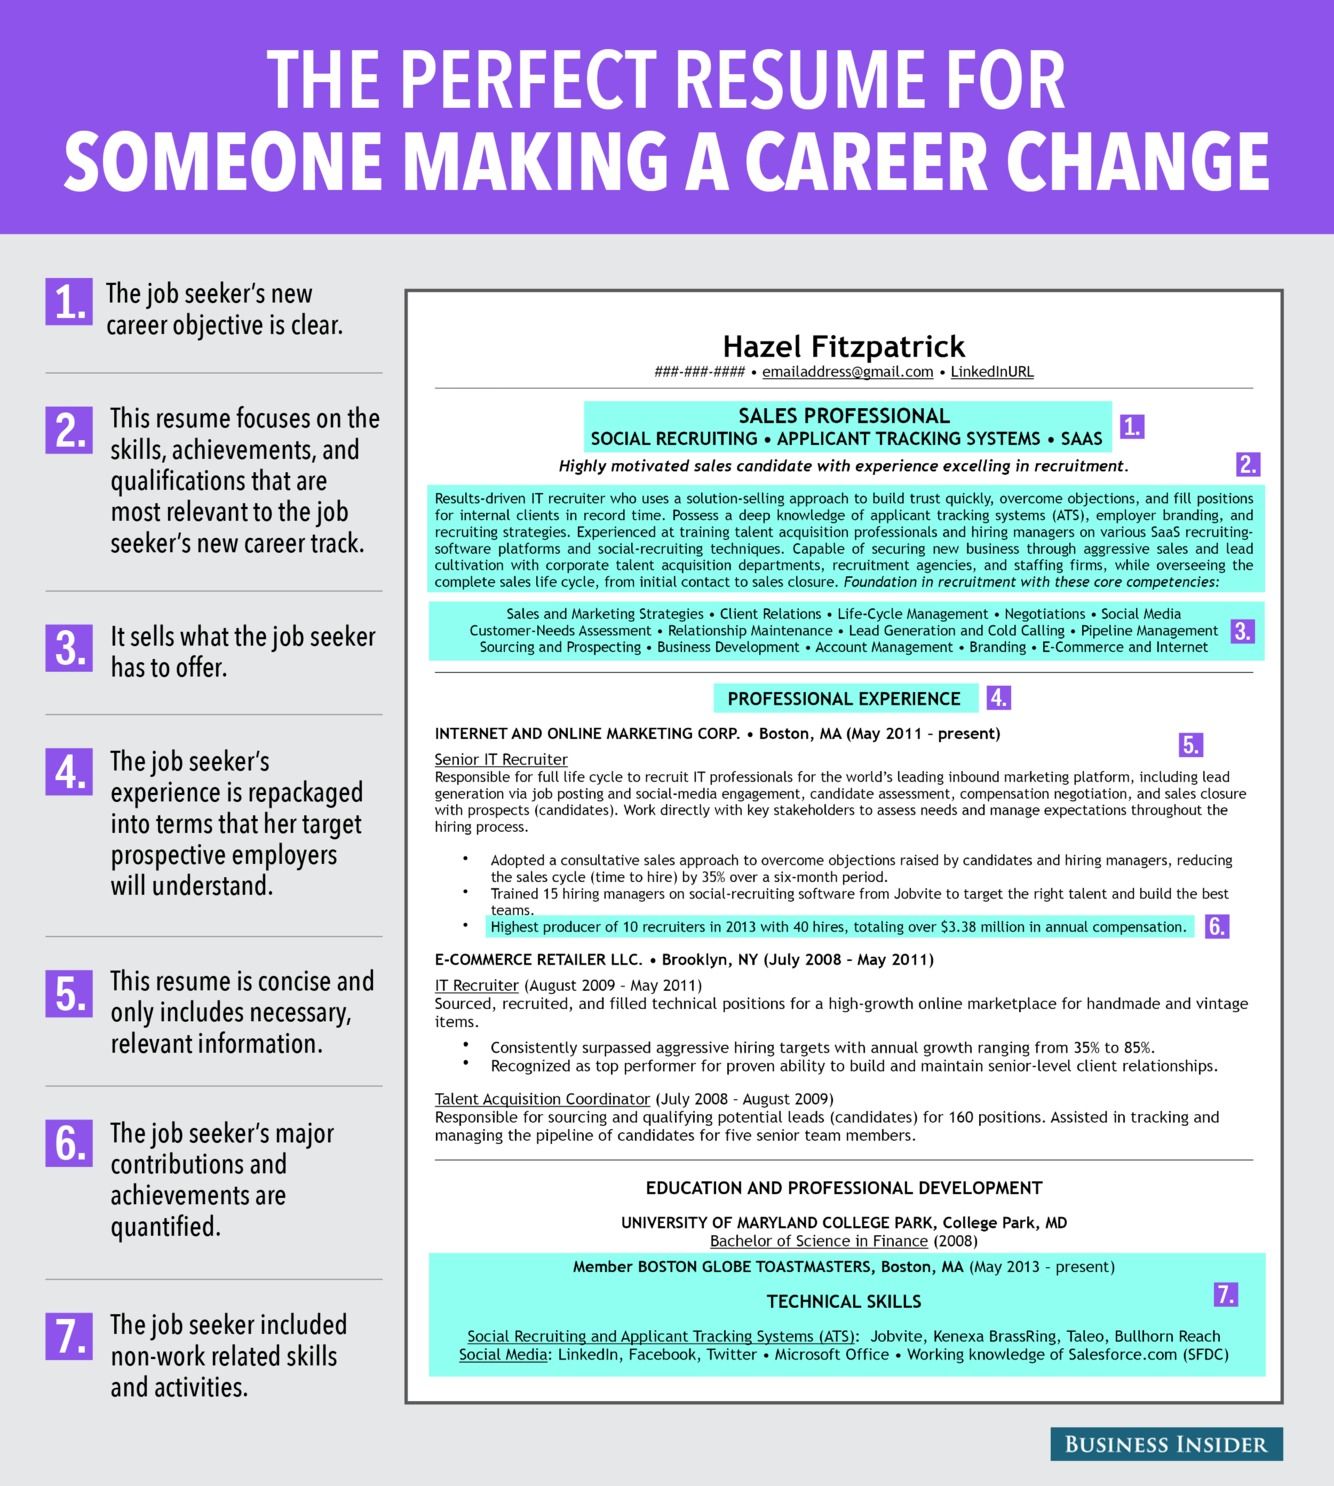 Ideal Resume For Someone Making A Career Change